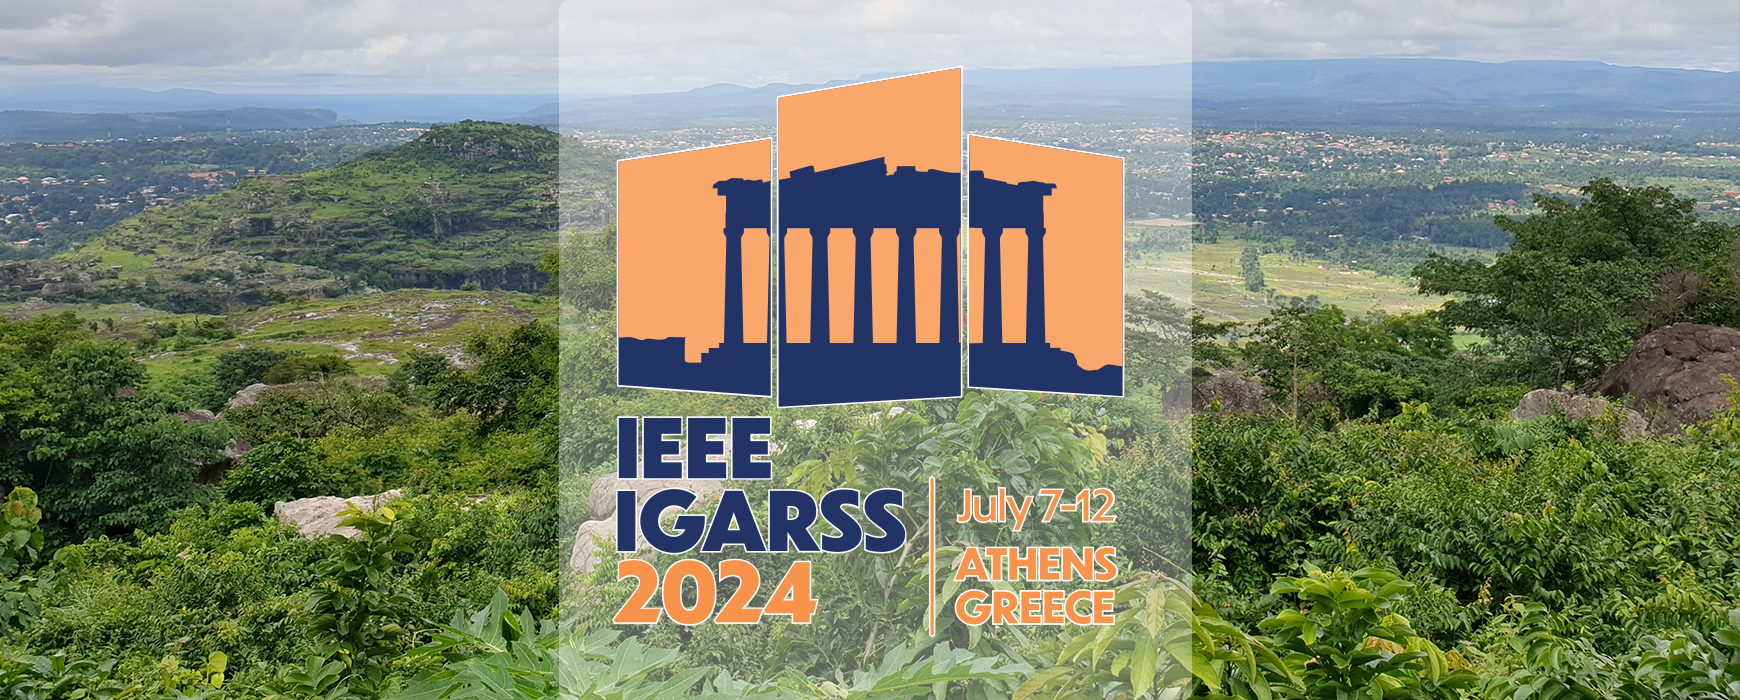 IGARSS 2024 conference: Presentations by experts